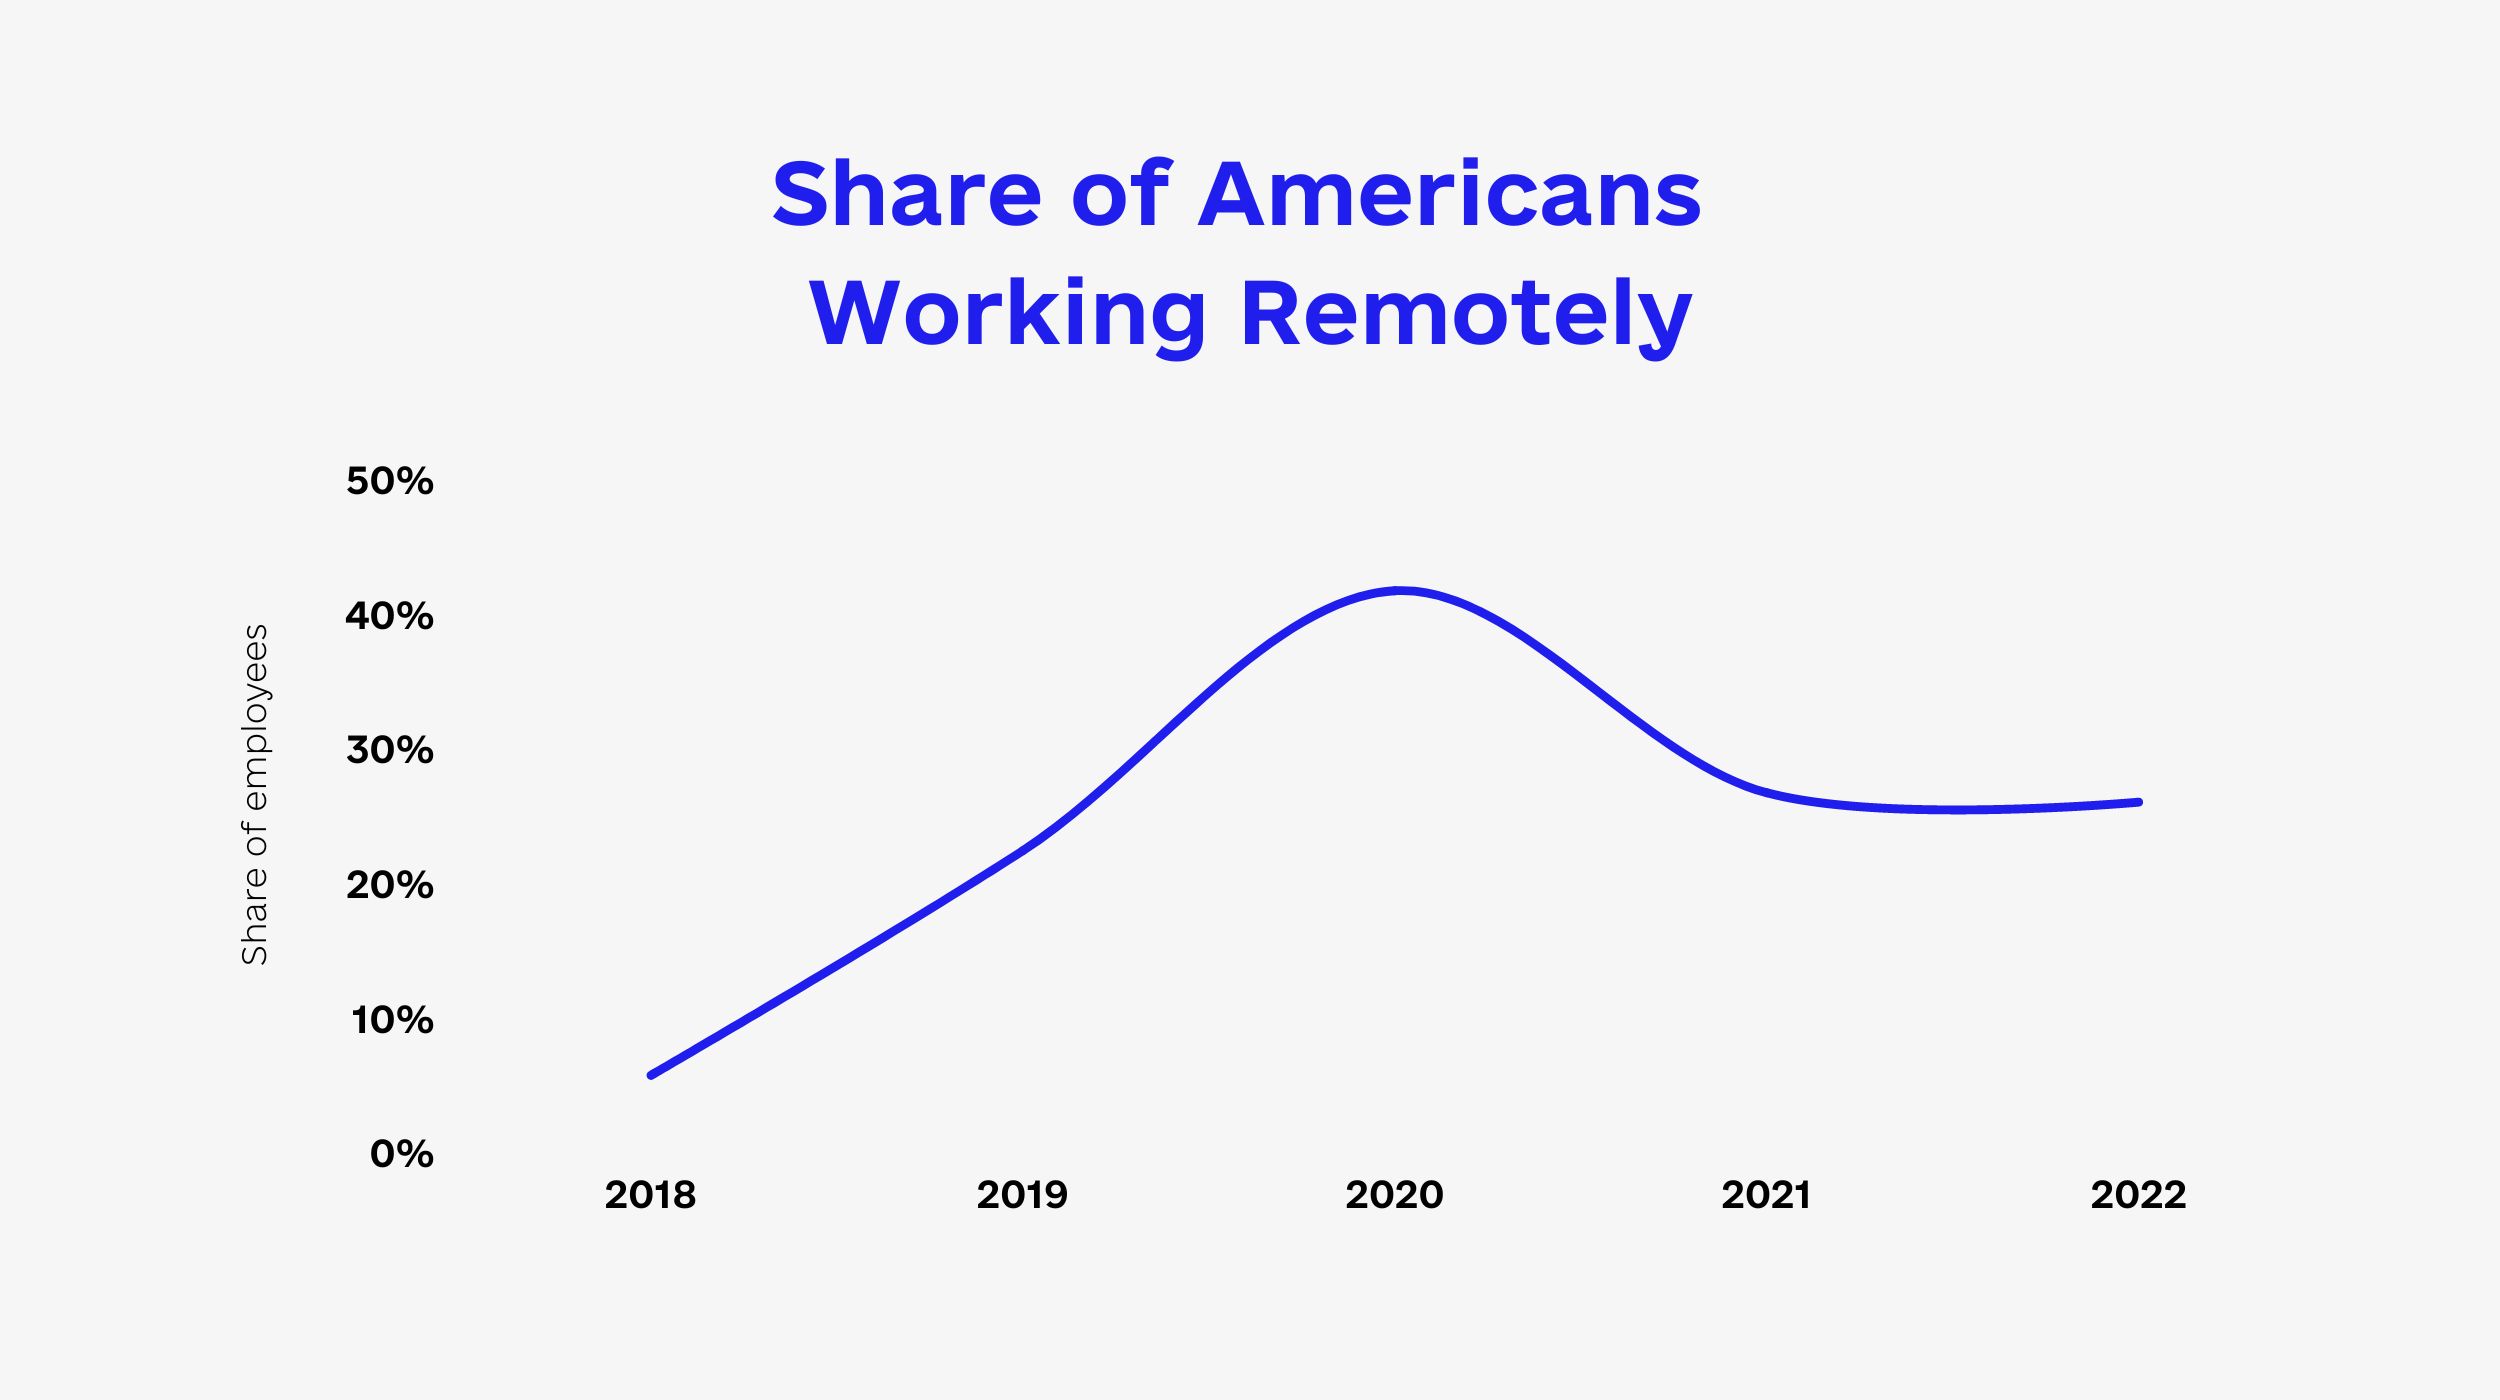 Share of Americans Working Remotely